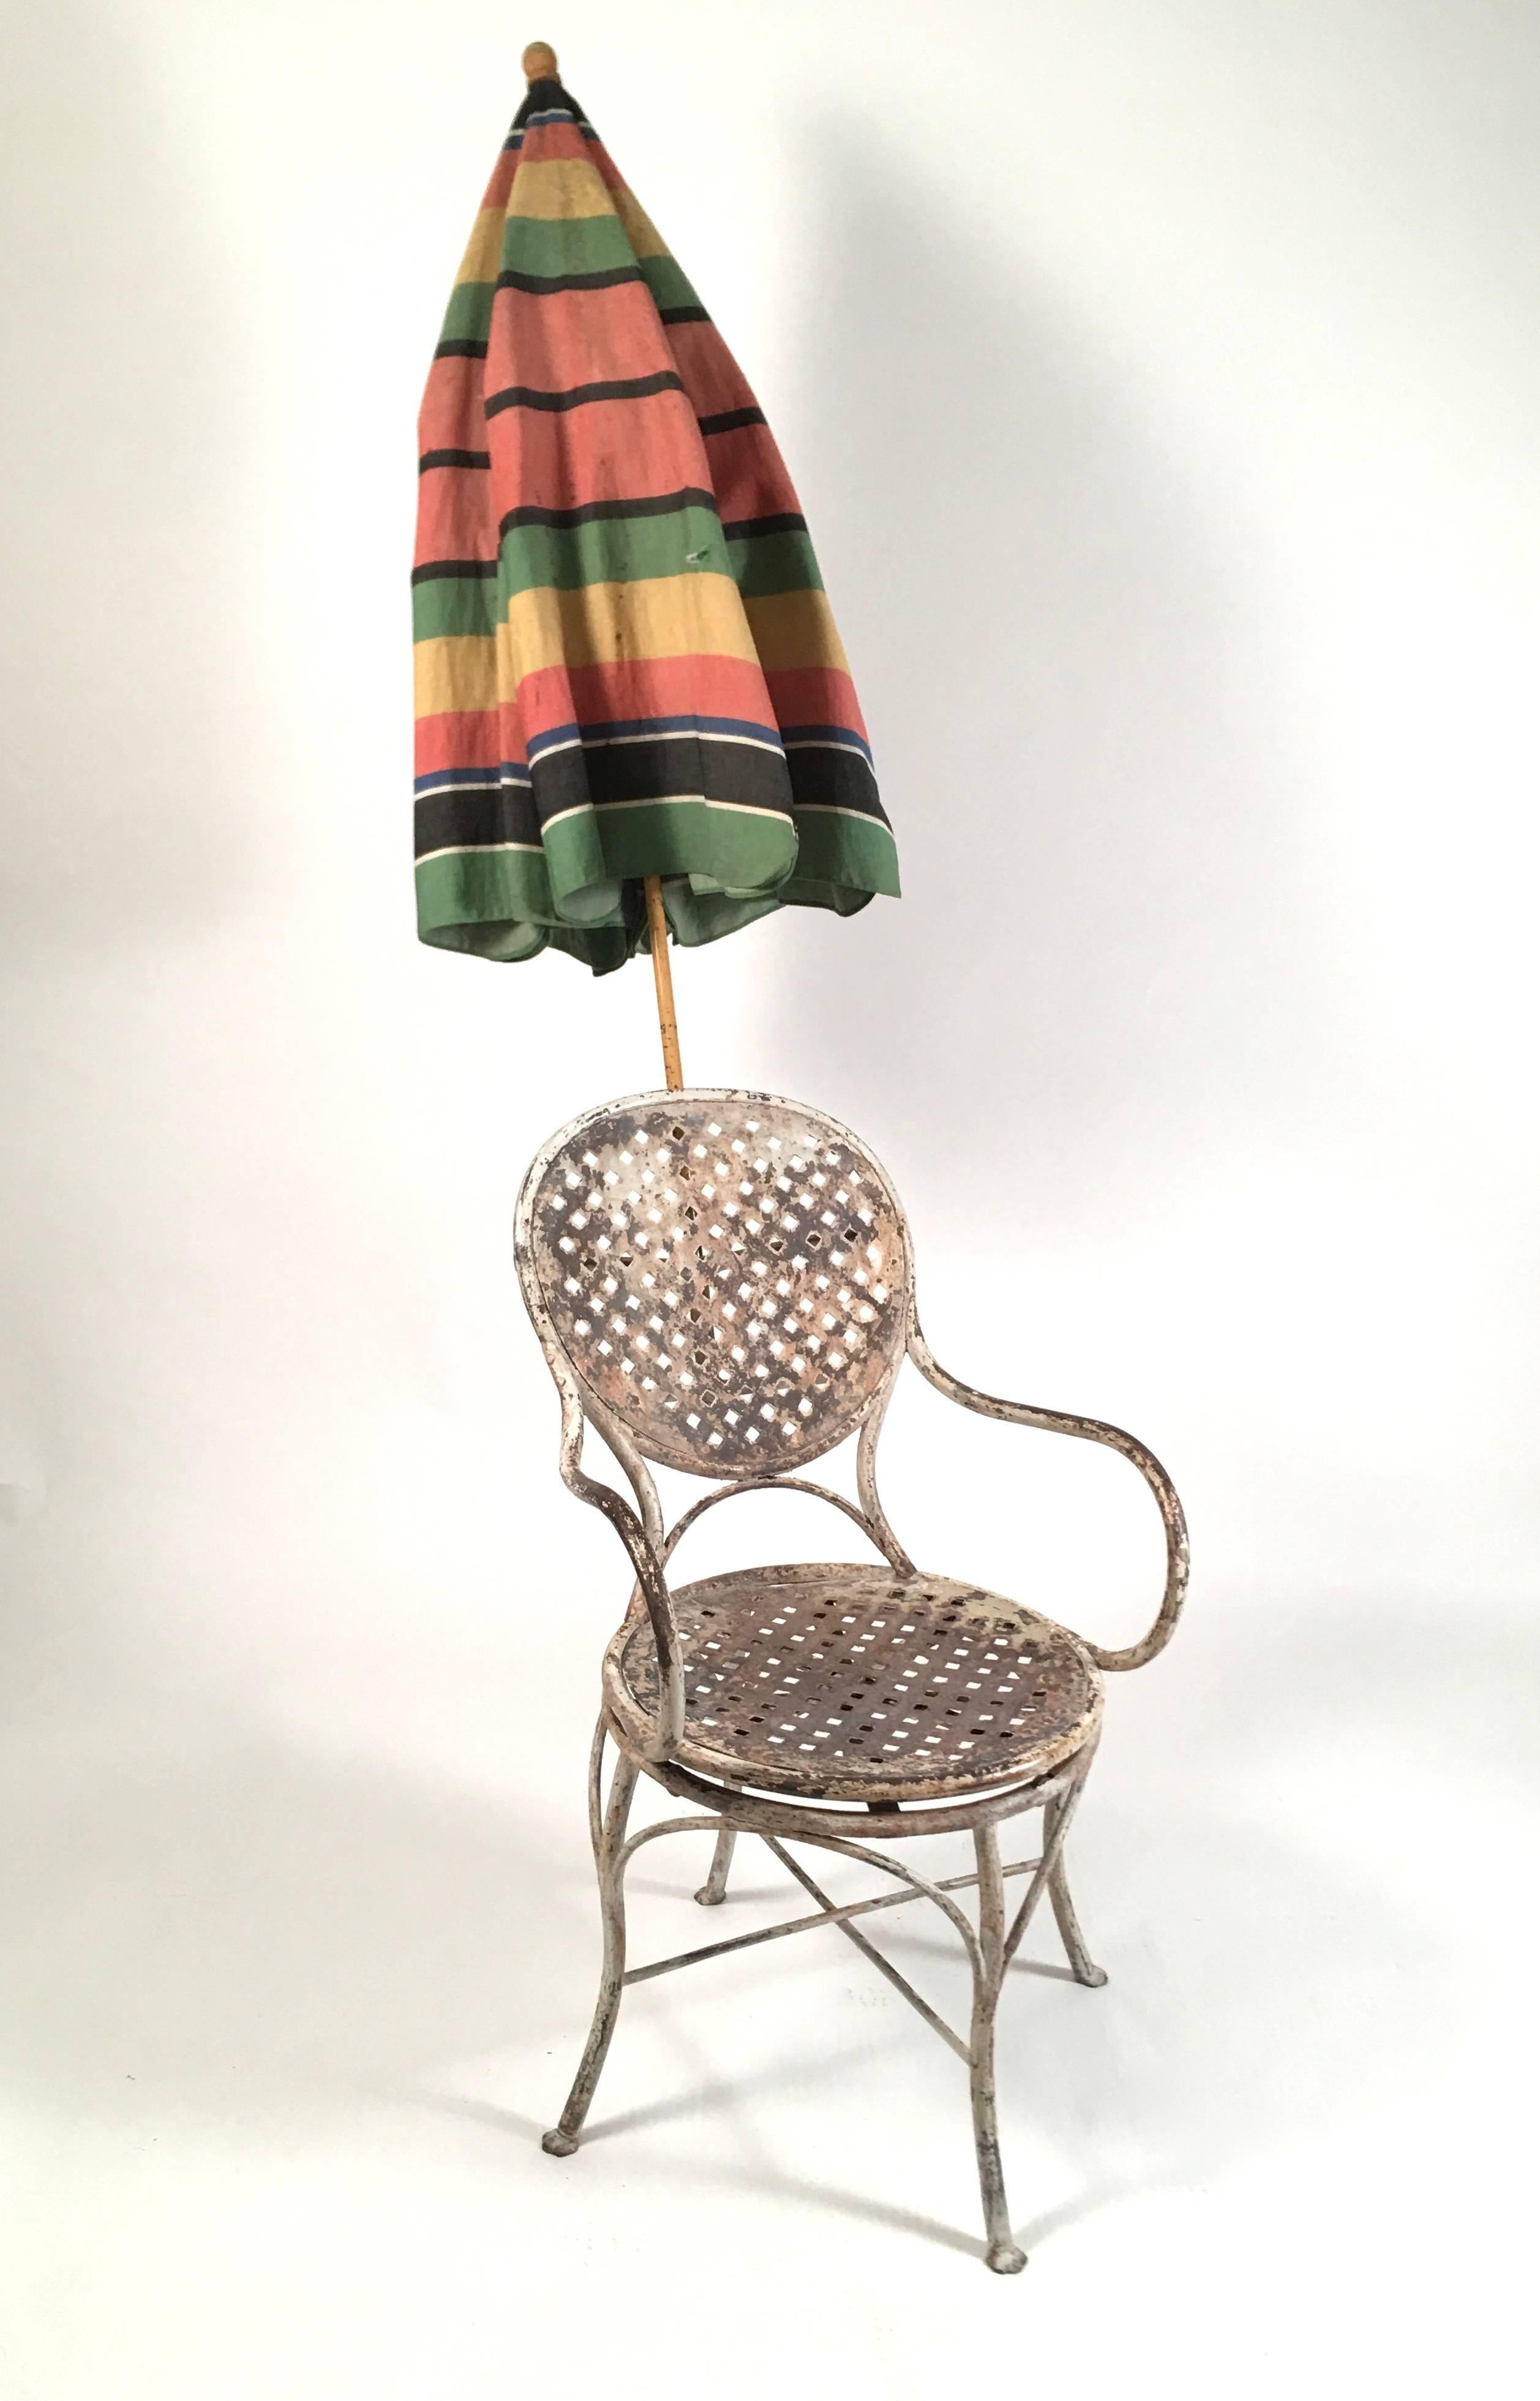 An unusual and wonderful 1920s French painted tubular iron garden chair, with swivel seat and original awning striped umbrella which fits into a cylindrical holder with wing nut on the back of the chair. It is easily added or removed. The seat of